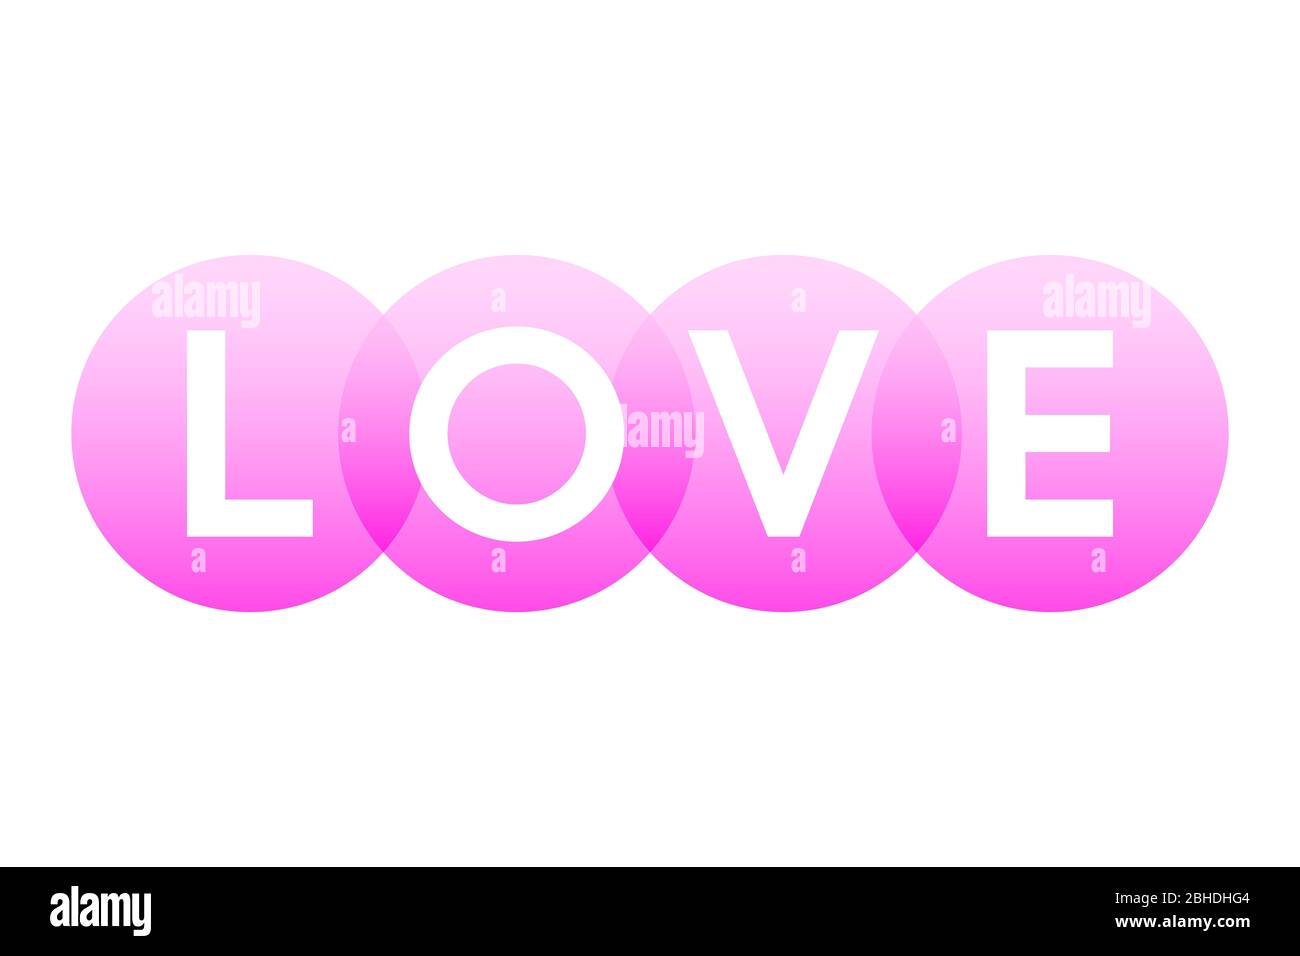 LOVE, letters of the word in bold white capitals shown on overlapping translucent pink circles. Isolated illustration on white background. Stock Photo